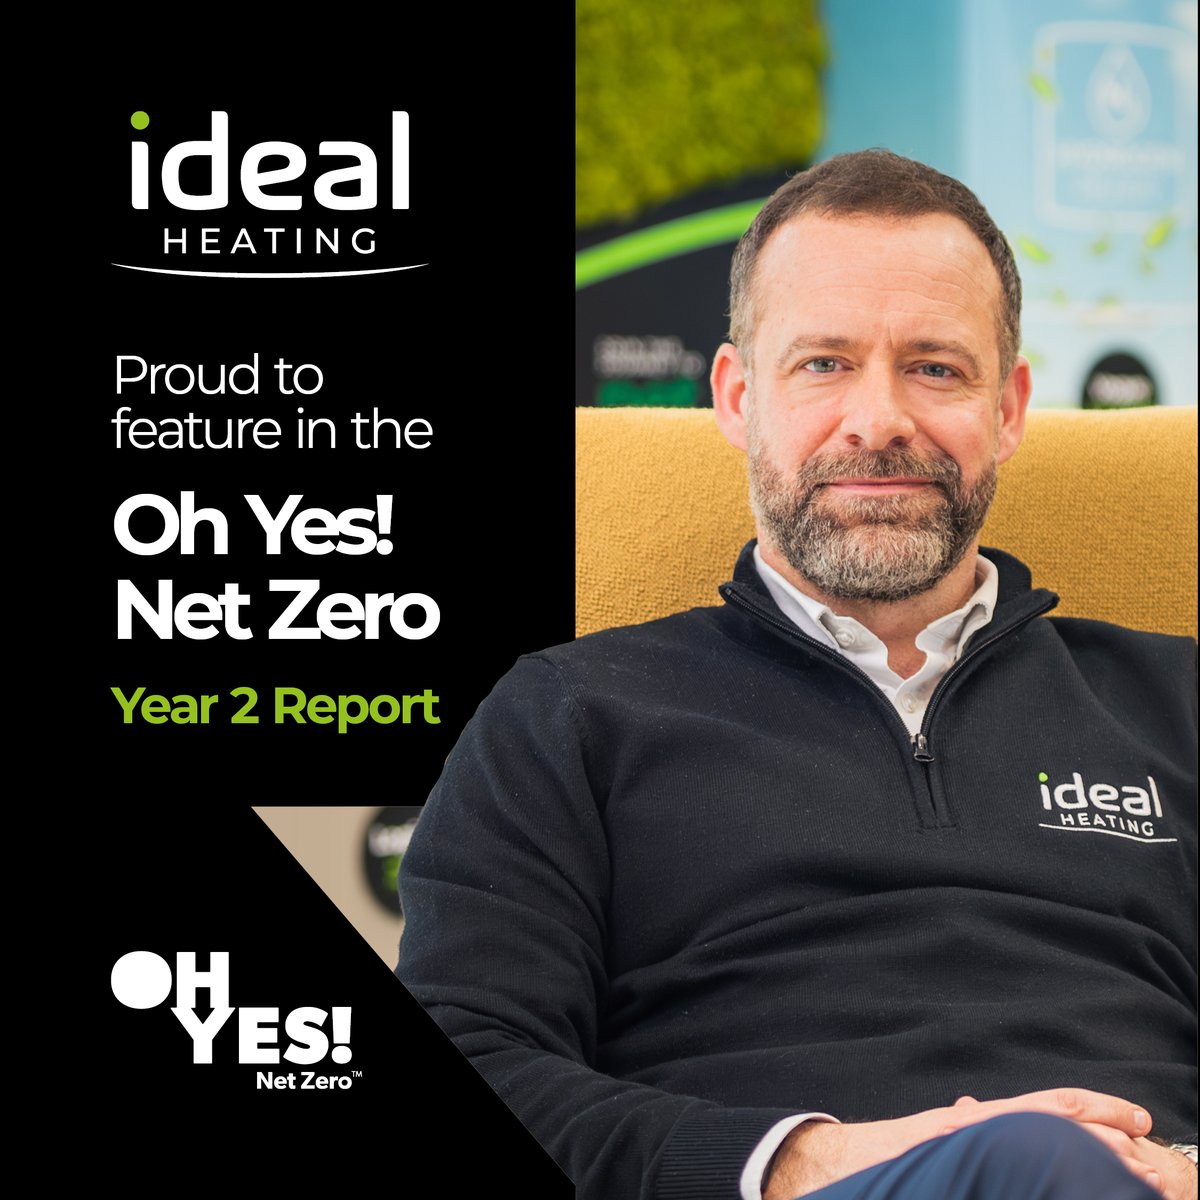 Today, @OhYesNetZero released a report featuring our very own John Jackson as it marks its two-year milestone since launch 🌍🌱 You can read the report here: reckitt.com/oh-yes-net-zer… #OhYesNetZero #NetZero #Decarbonisation #Hull #Sustainability